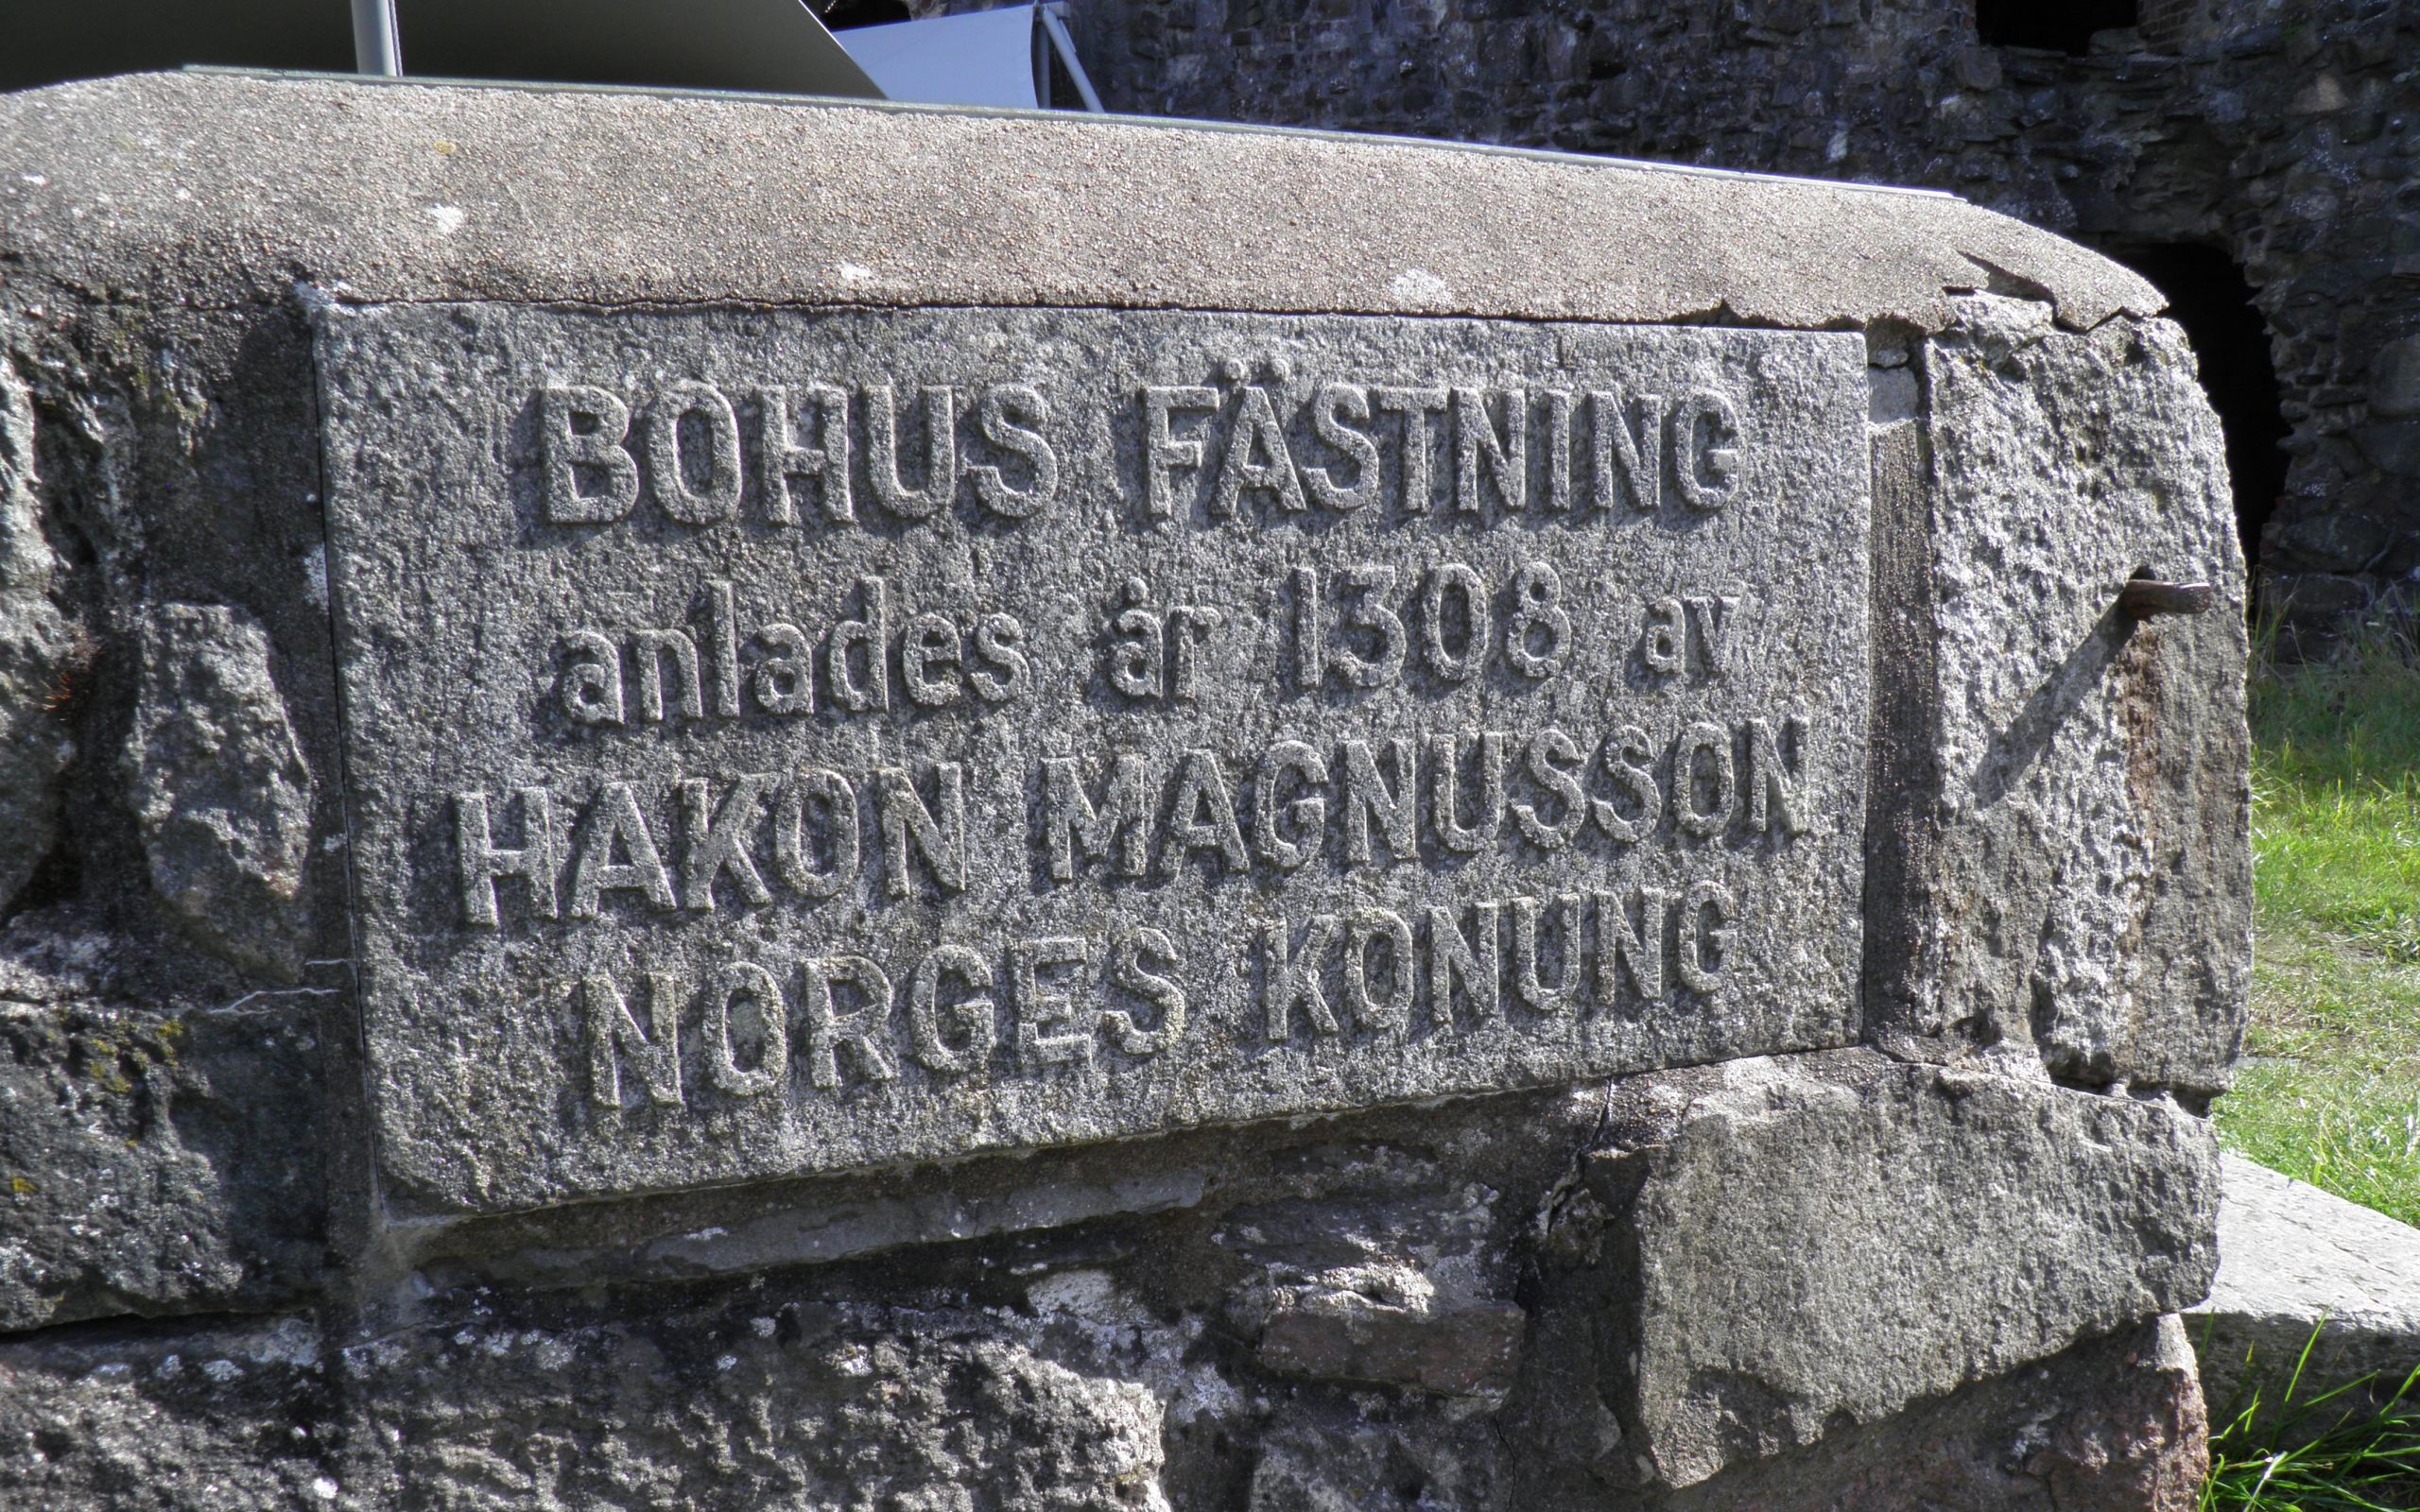  Bohus Fortress HQ Background Images